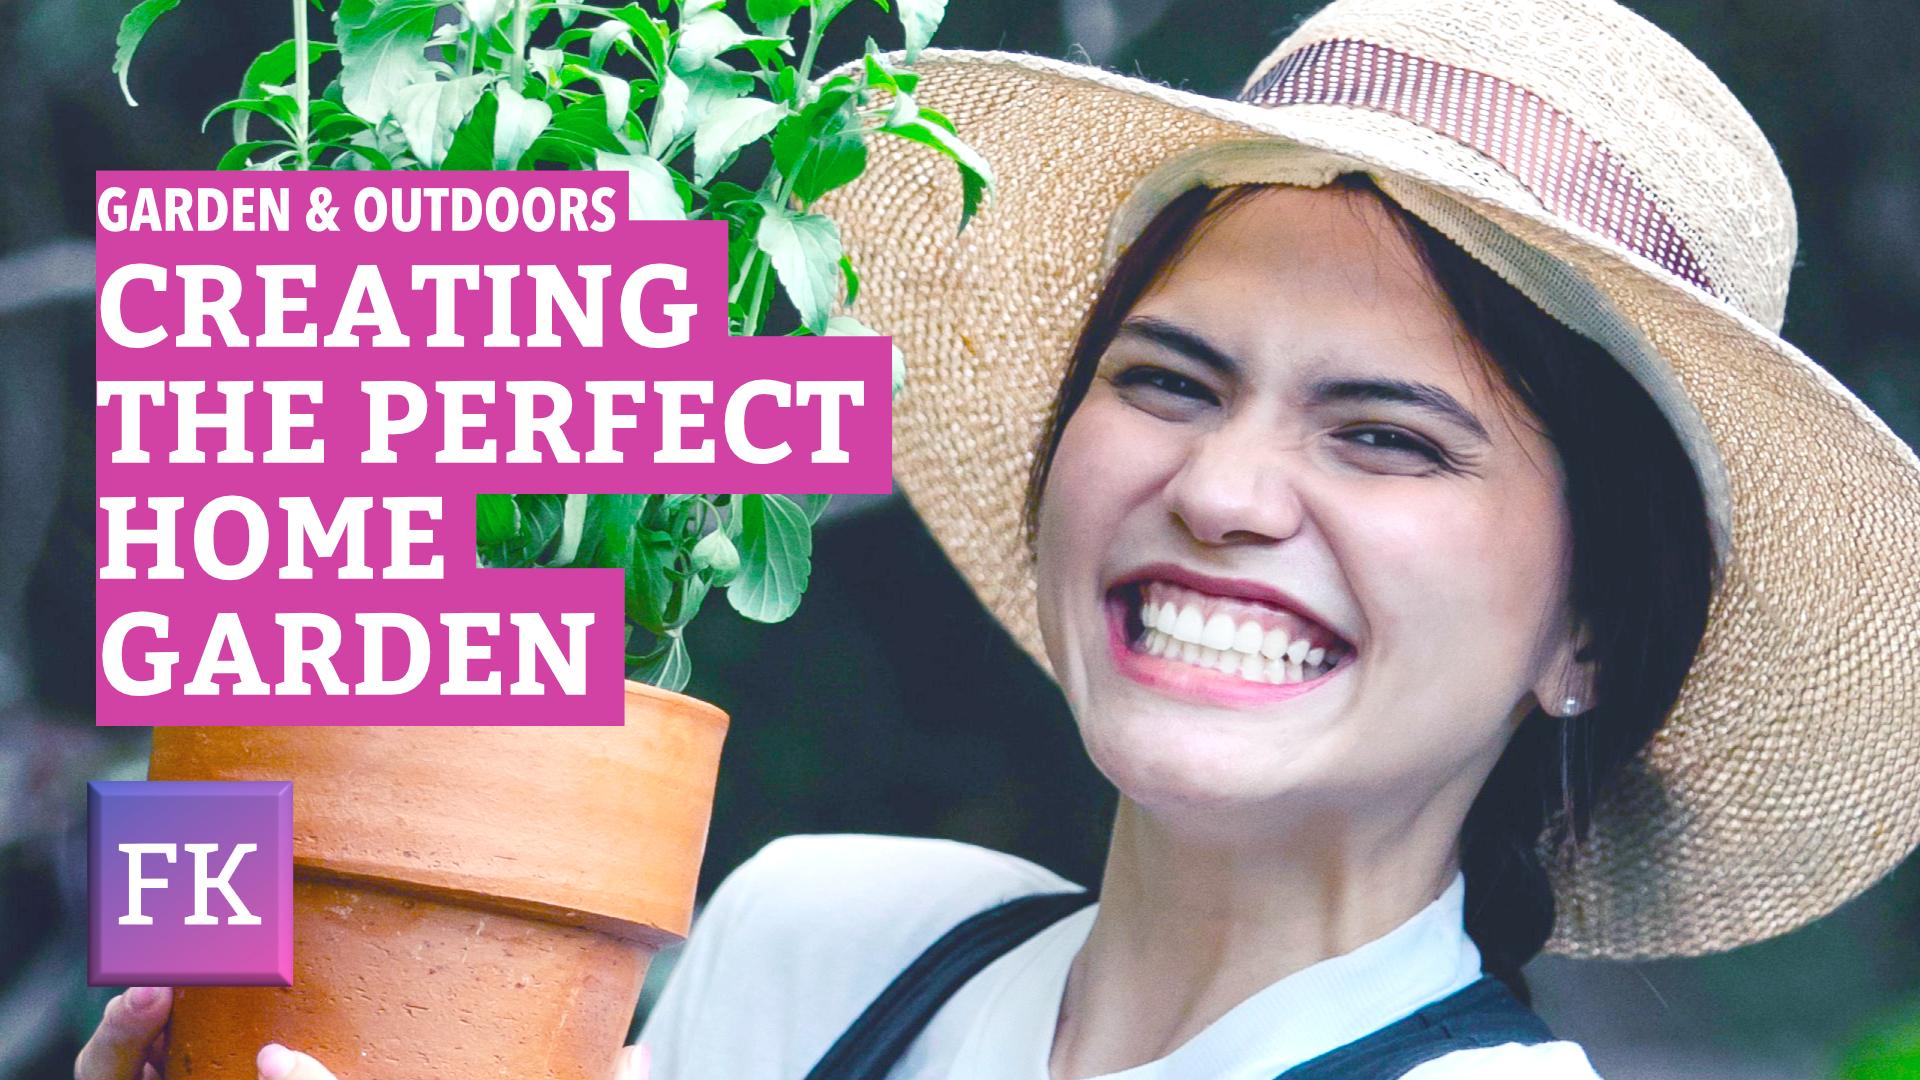 Fresh Kit's guide to creating the perfect home garden, features young lady grinning profusely with excitement after growing a healthy crop of plants in her garden